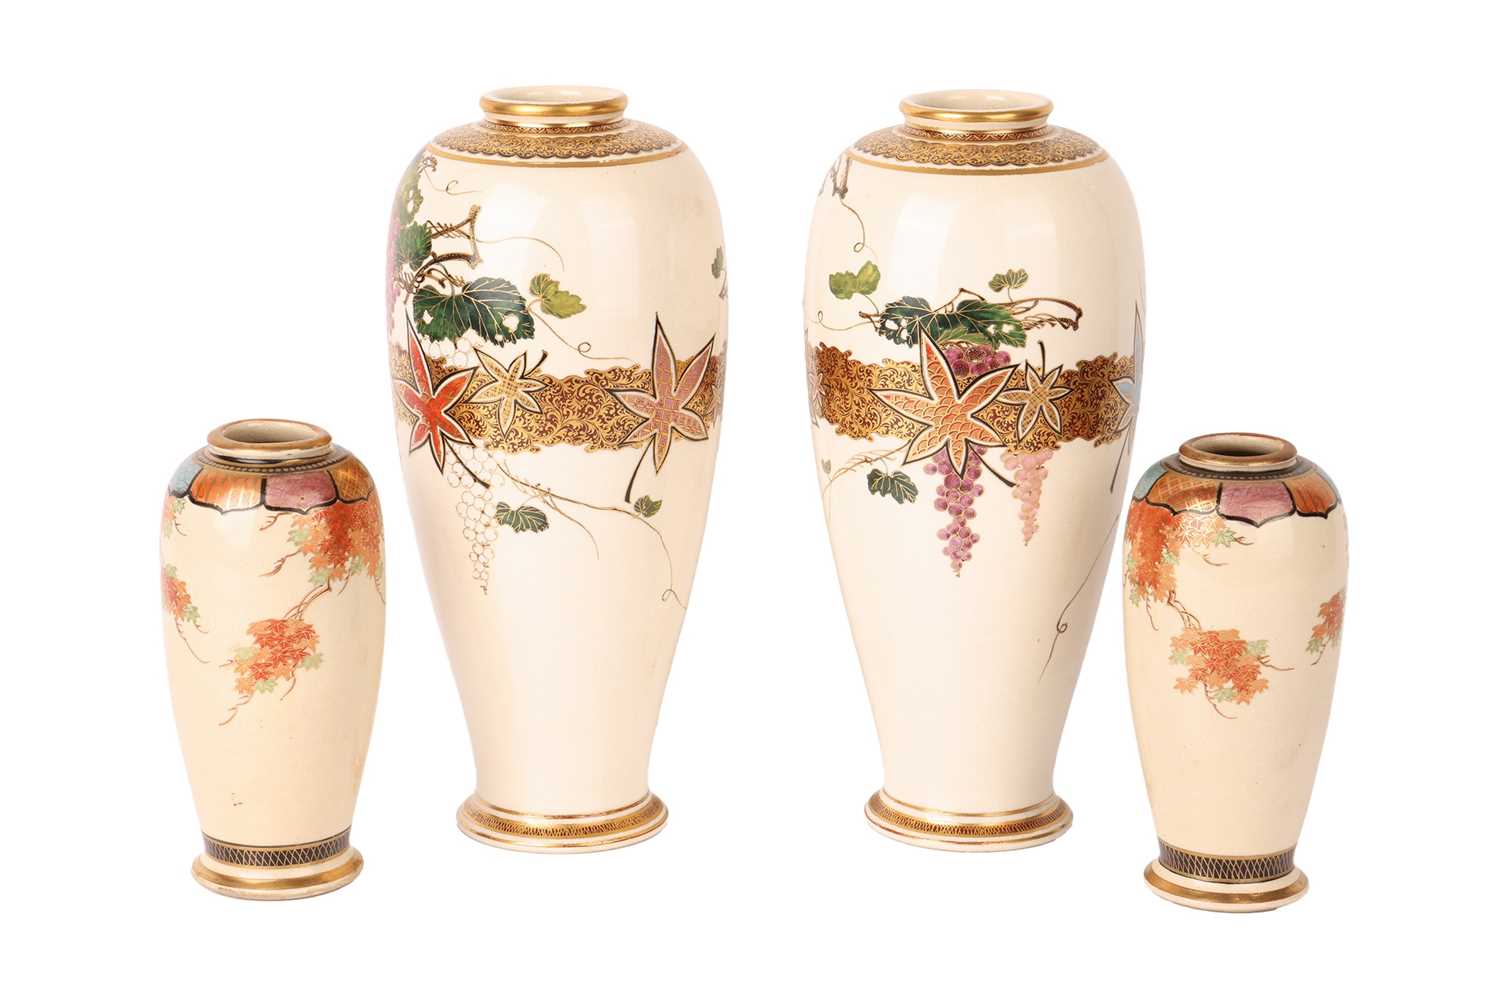 Two graduated pairs of Meiji period Japanese Satsuma vases, decorated with a wisteria motif, the lar